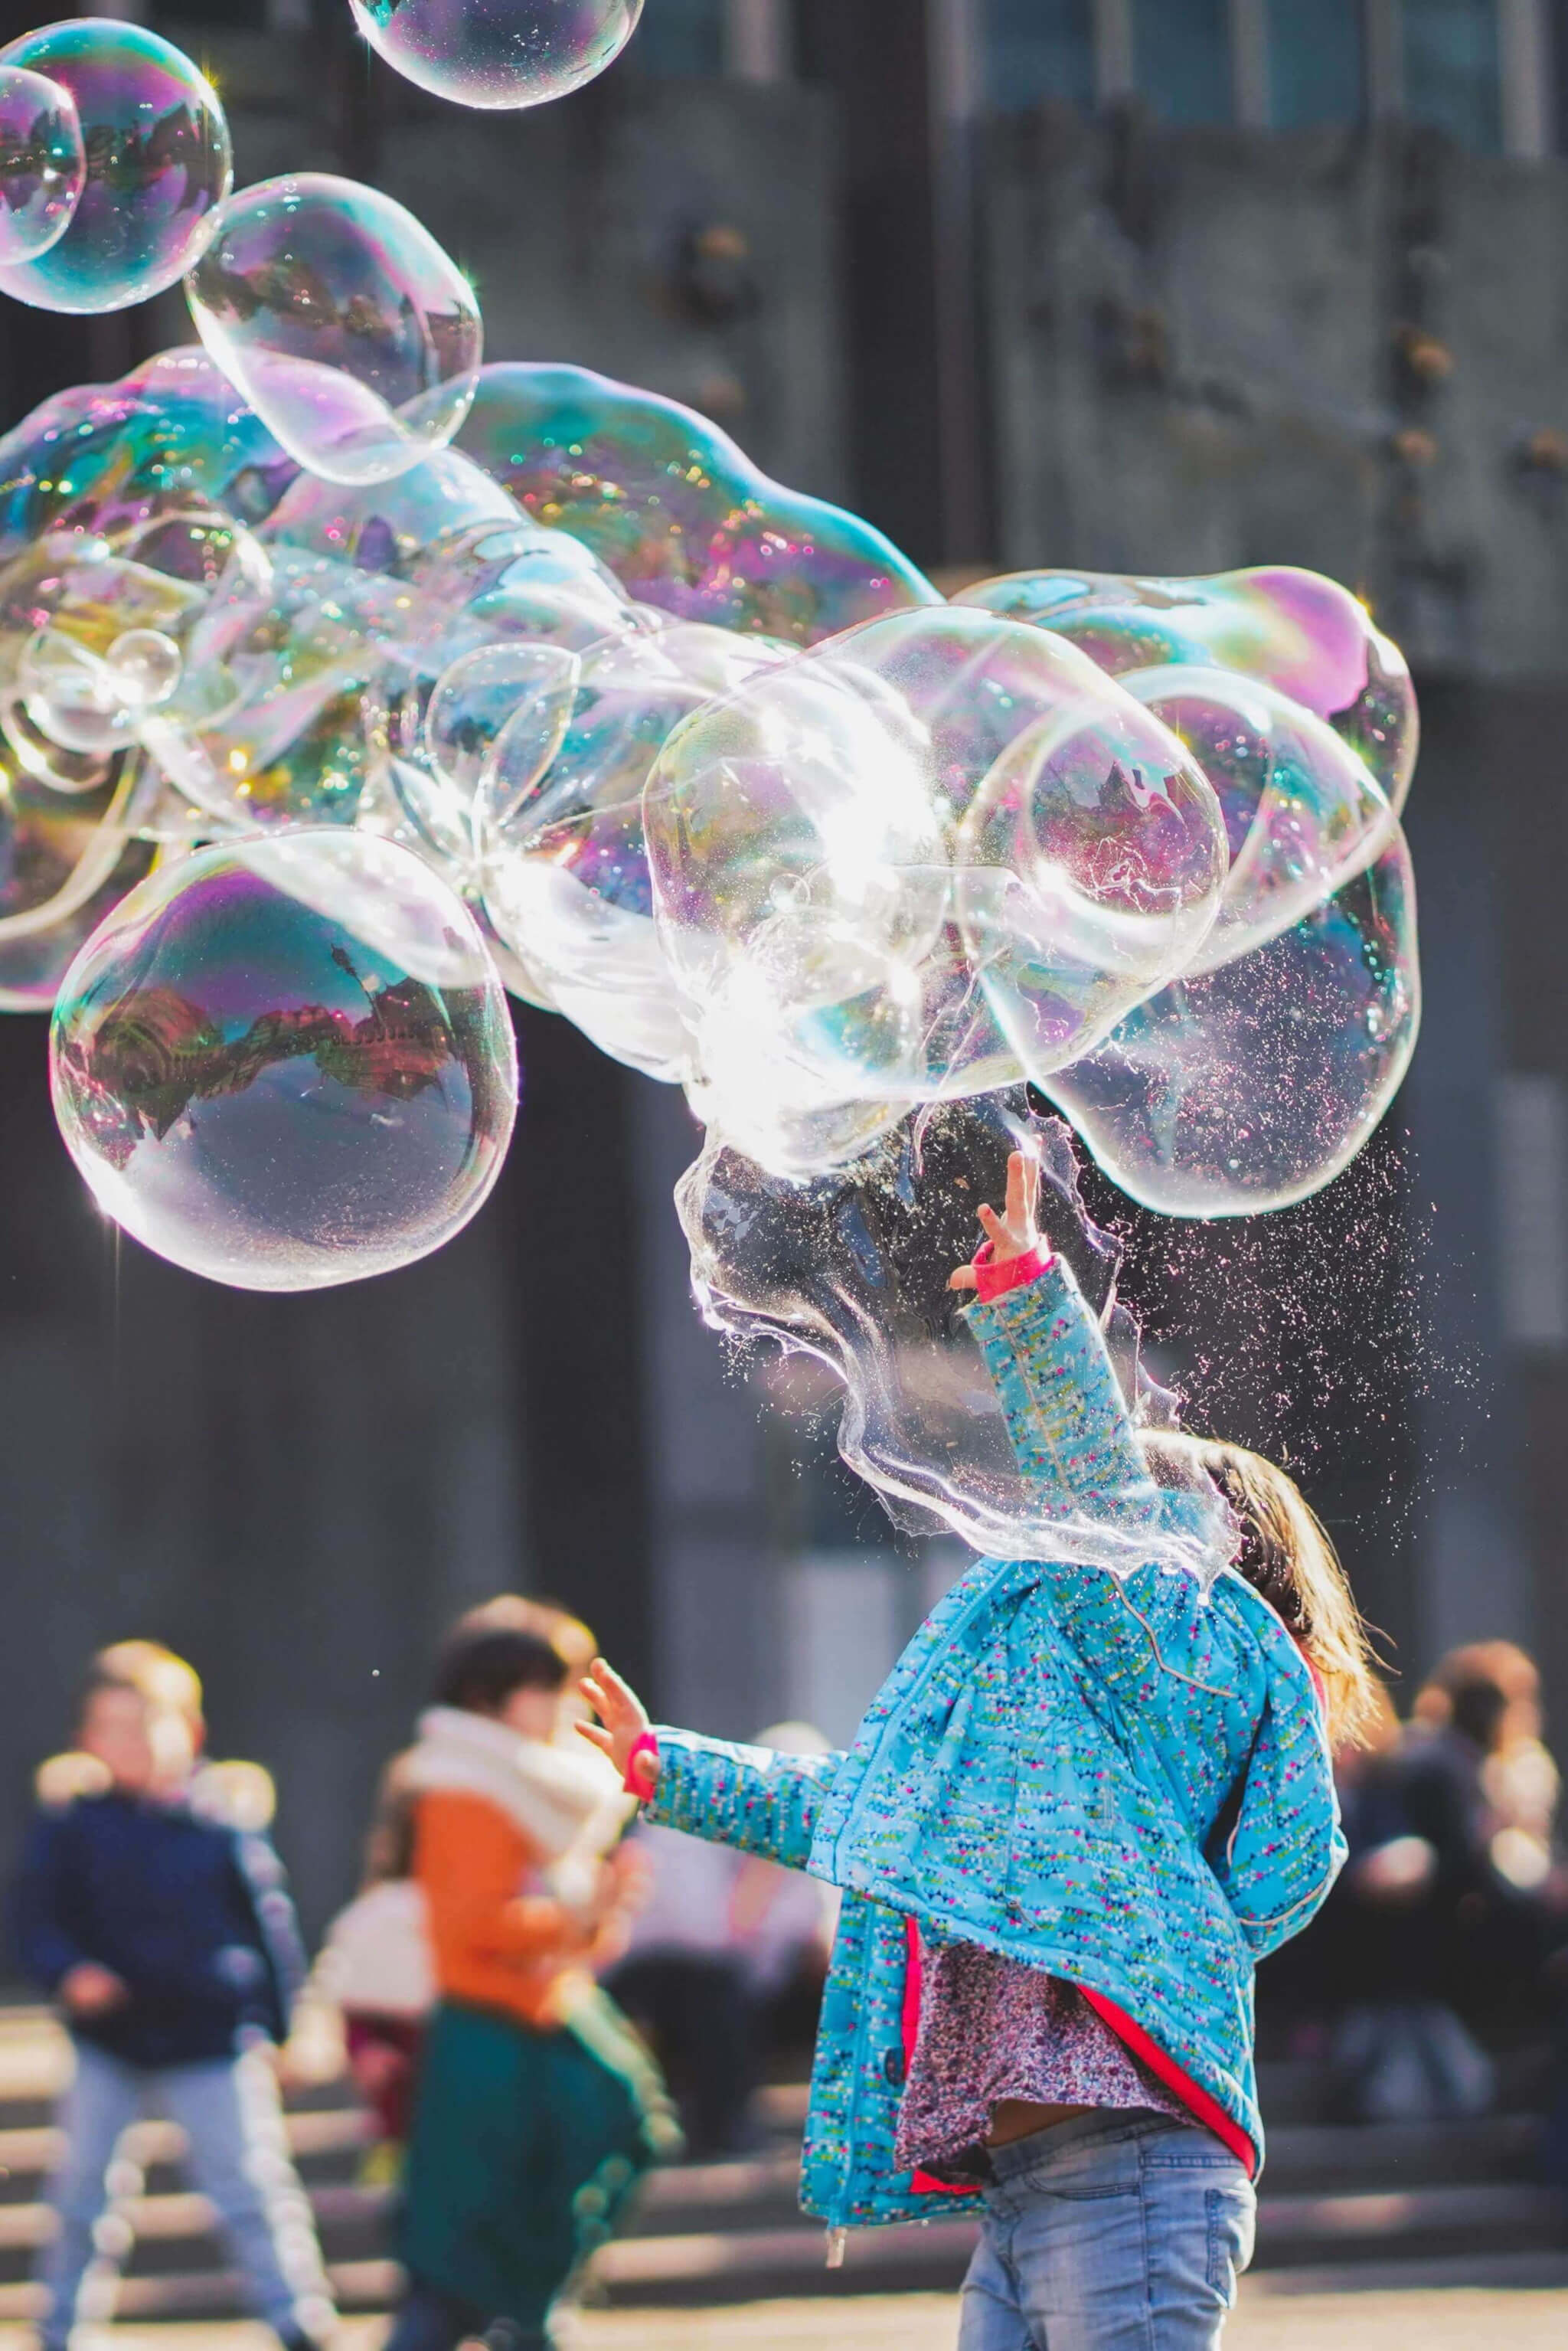 The girl is trying to catch soap bubbles.